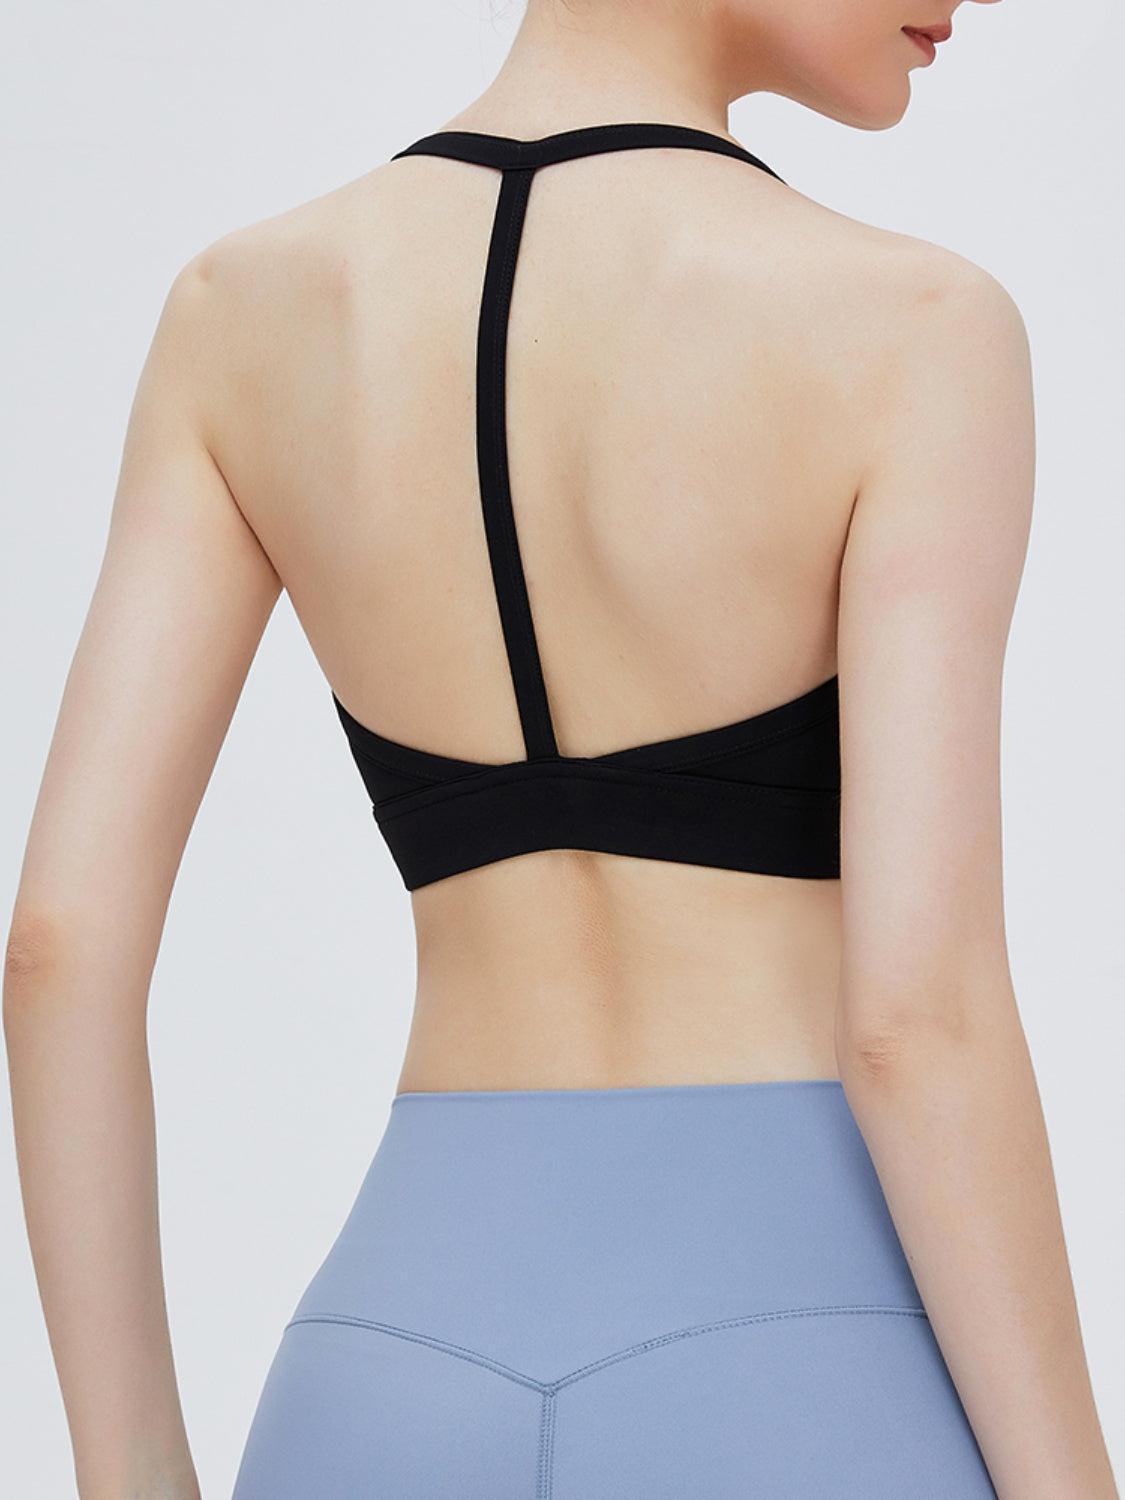 the back of a woman wearing a black sports bra